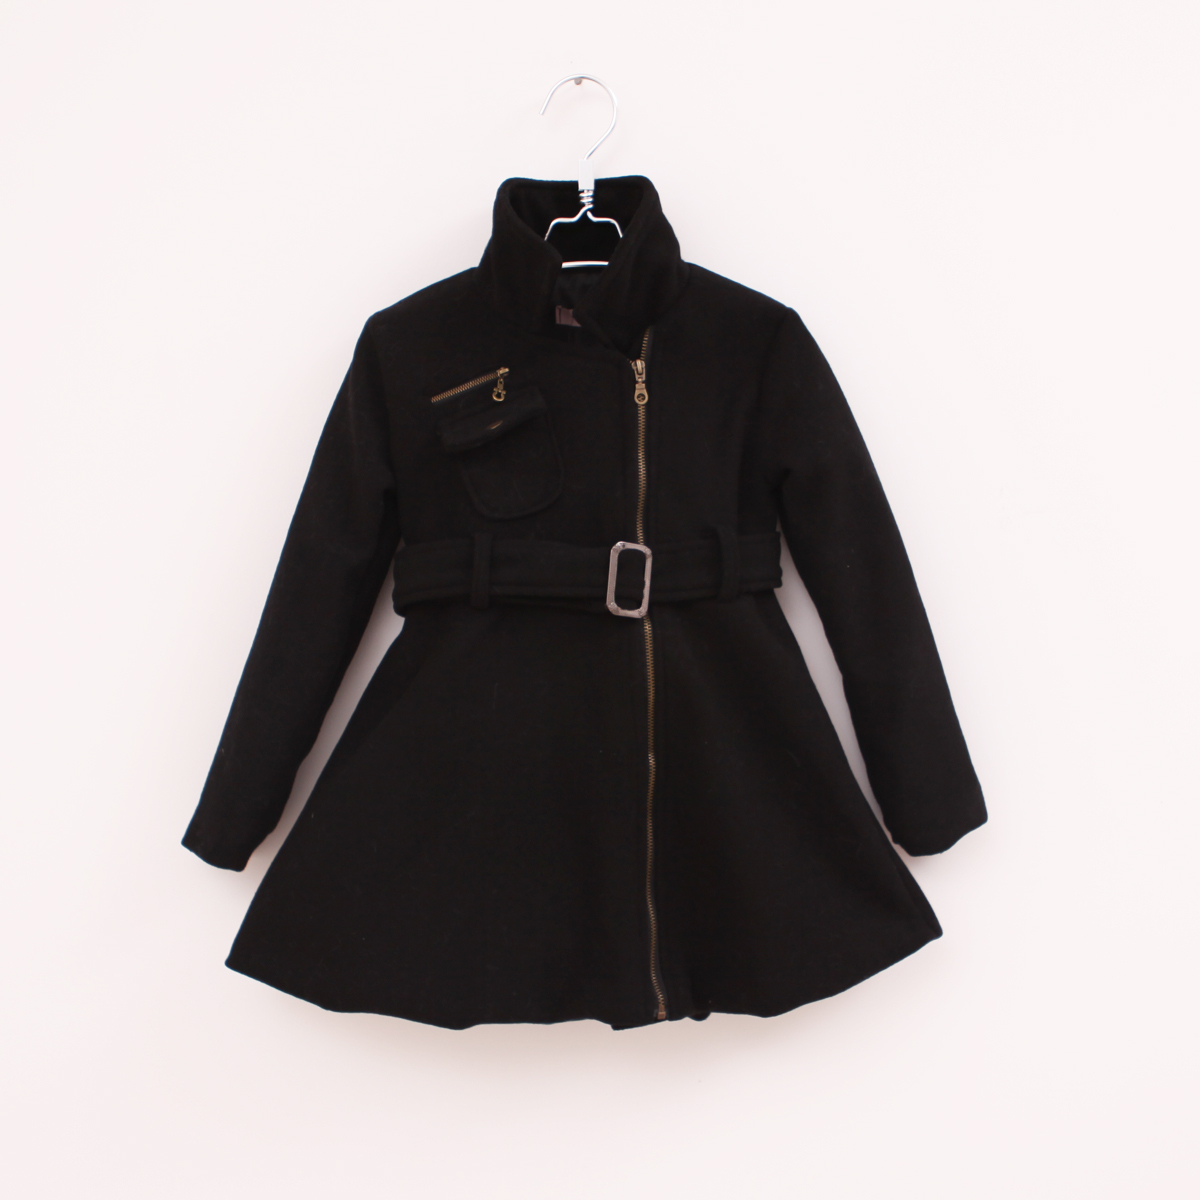 2012 children's clothing autumn and winter female child outerwear child trench baby dress little girl wool coat